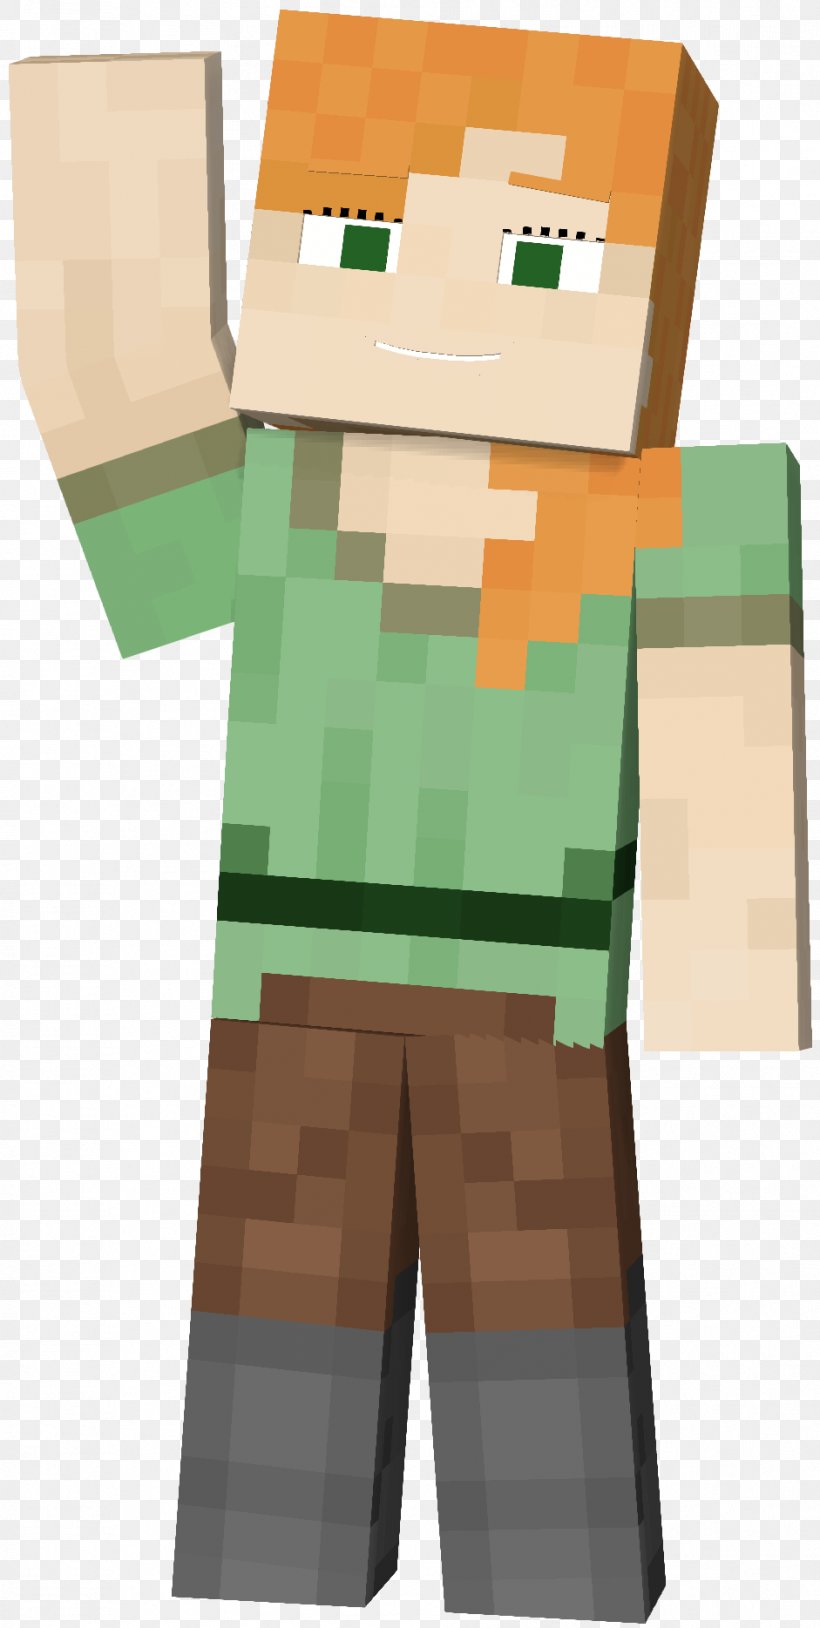 Minecraft Video Game Player Character Gamer, PNG, 941x1869px, Minecraft, Adventure Game, Character, Game, Gamer Download Free